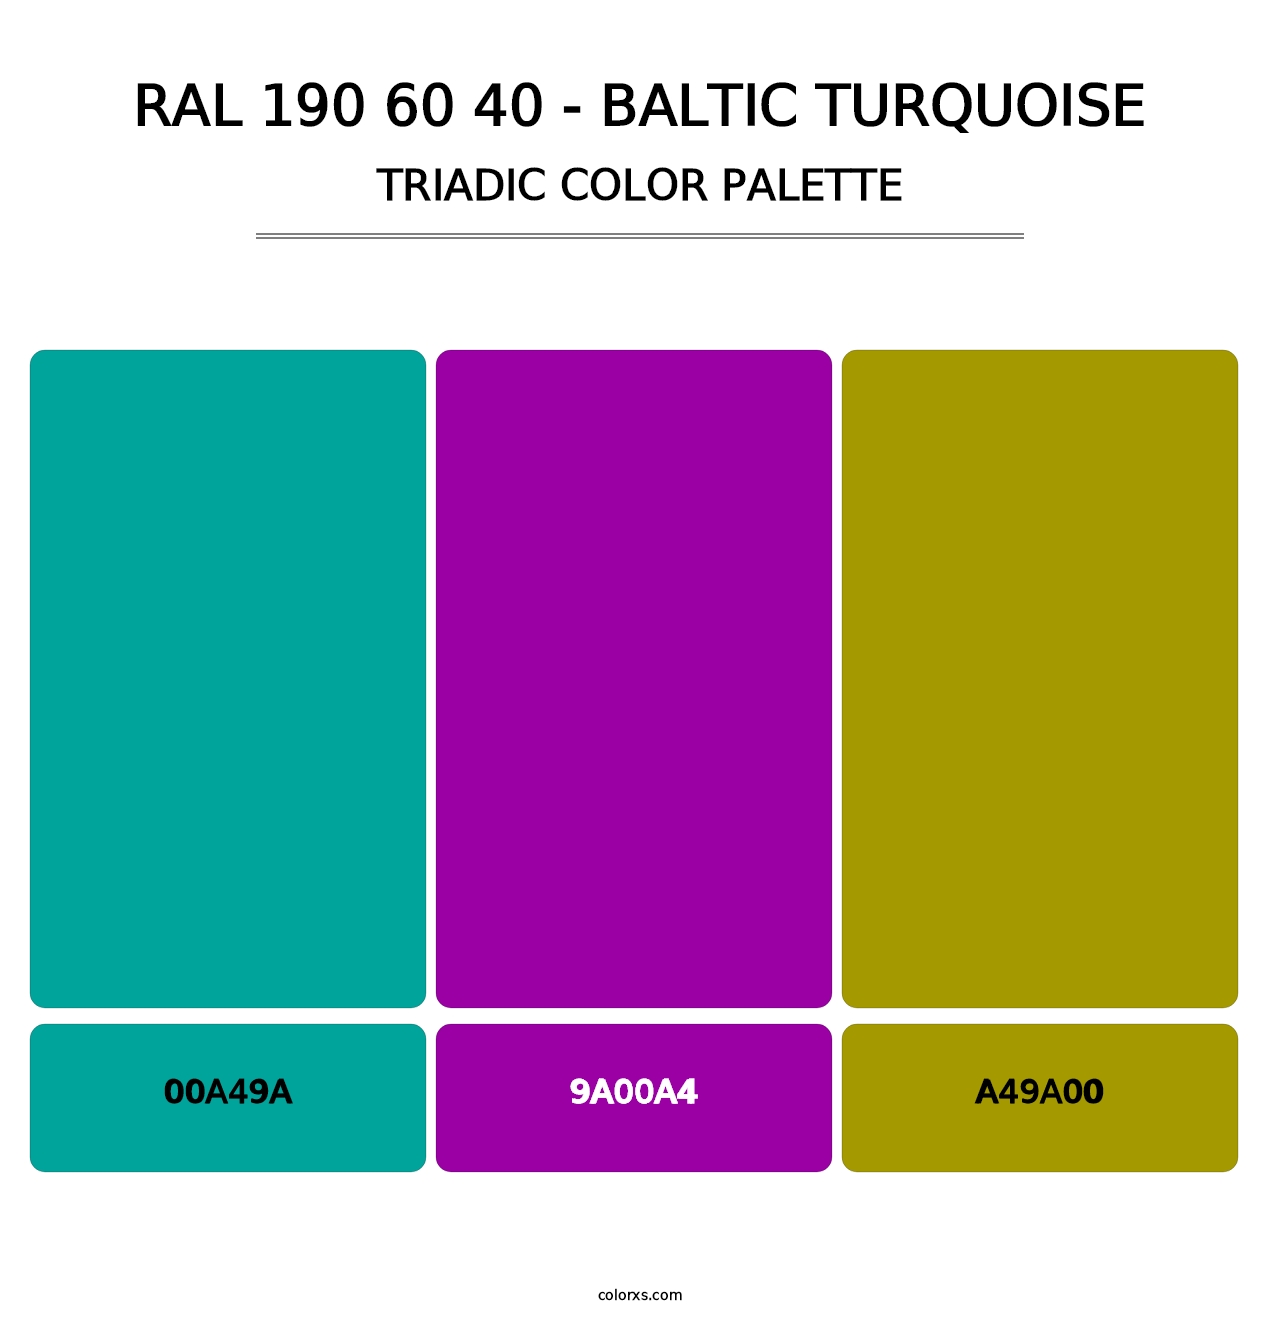 RAL 190 60 40 - Baltic Turquoise - Triadic Color Palette